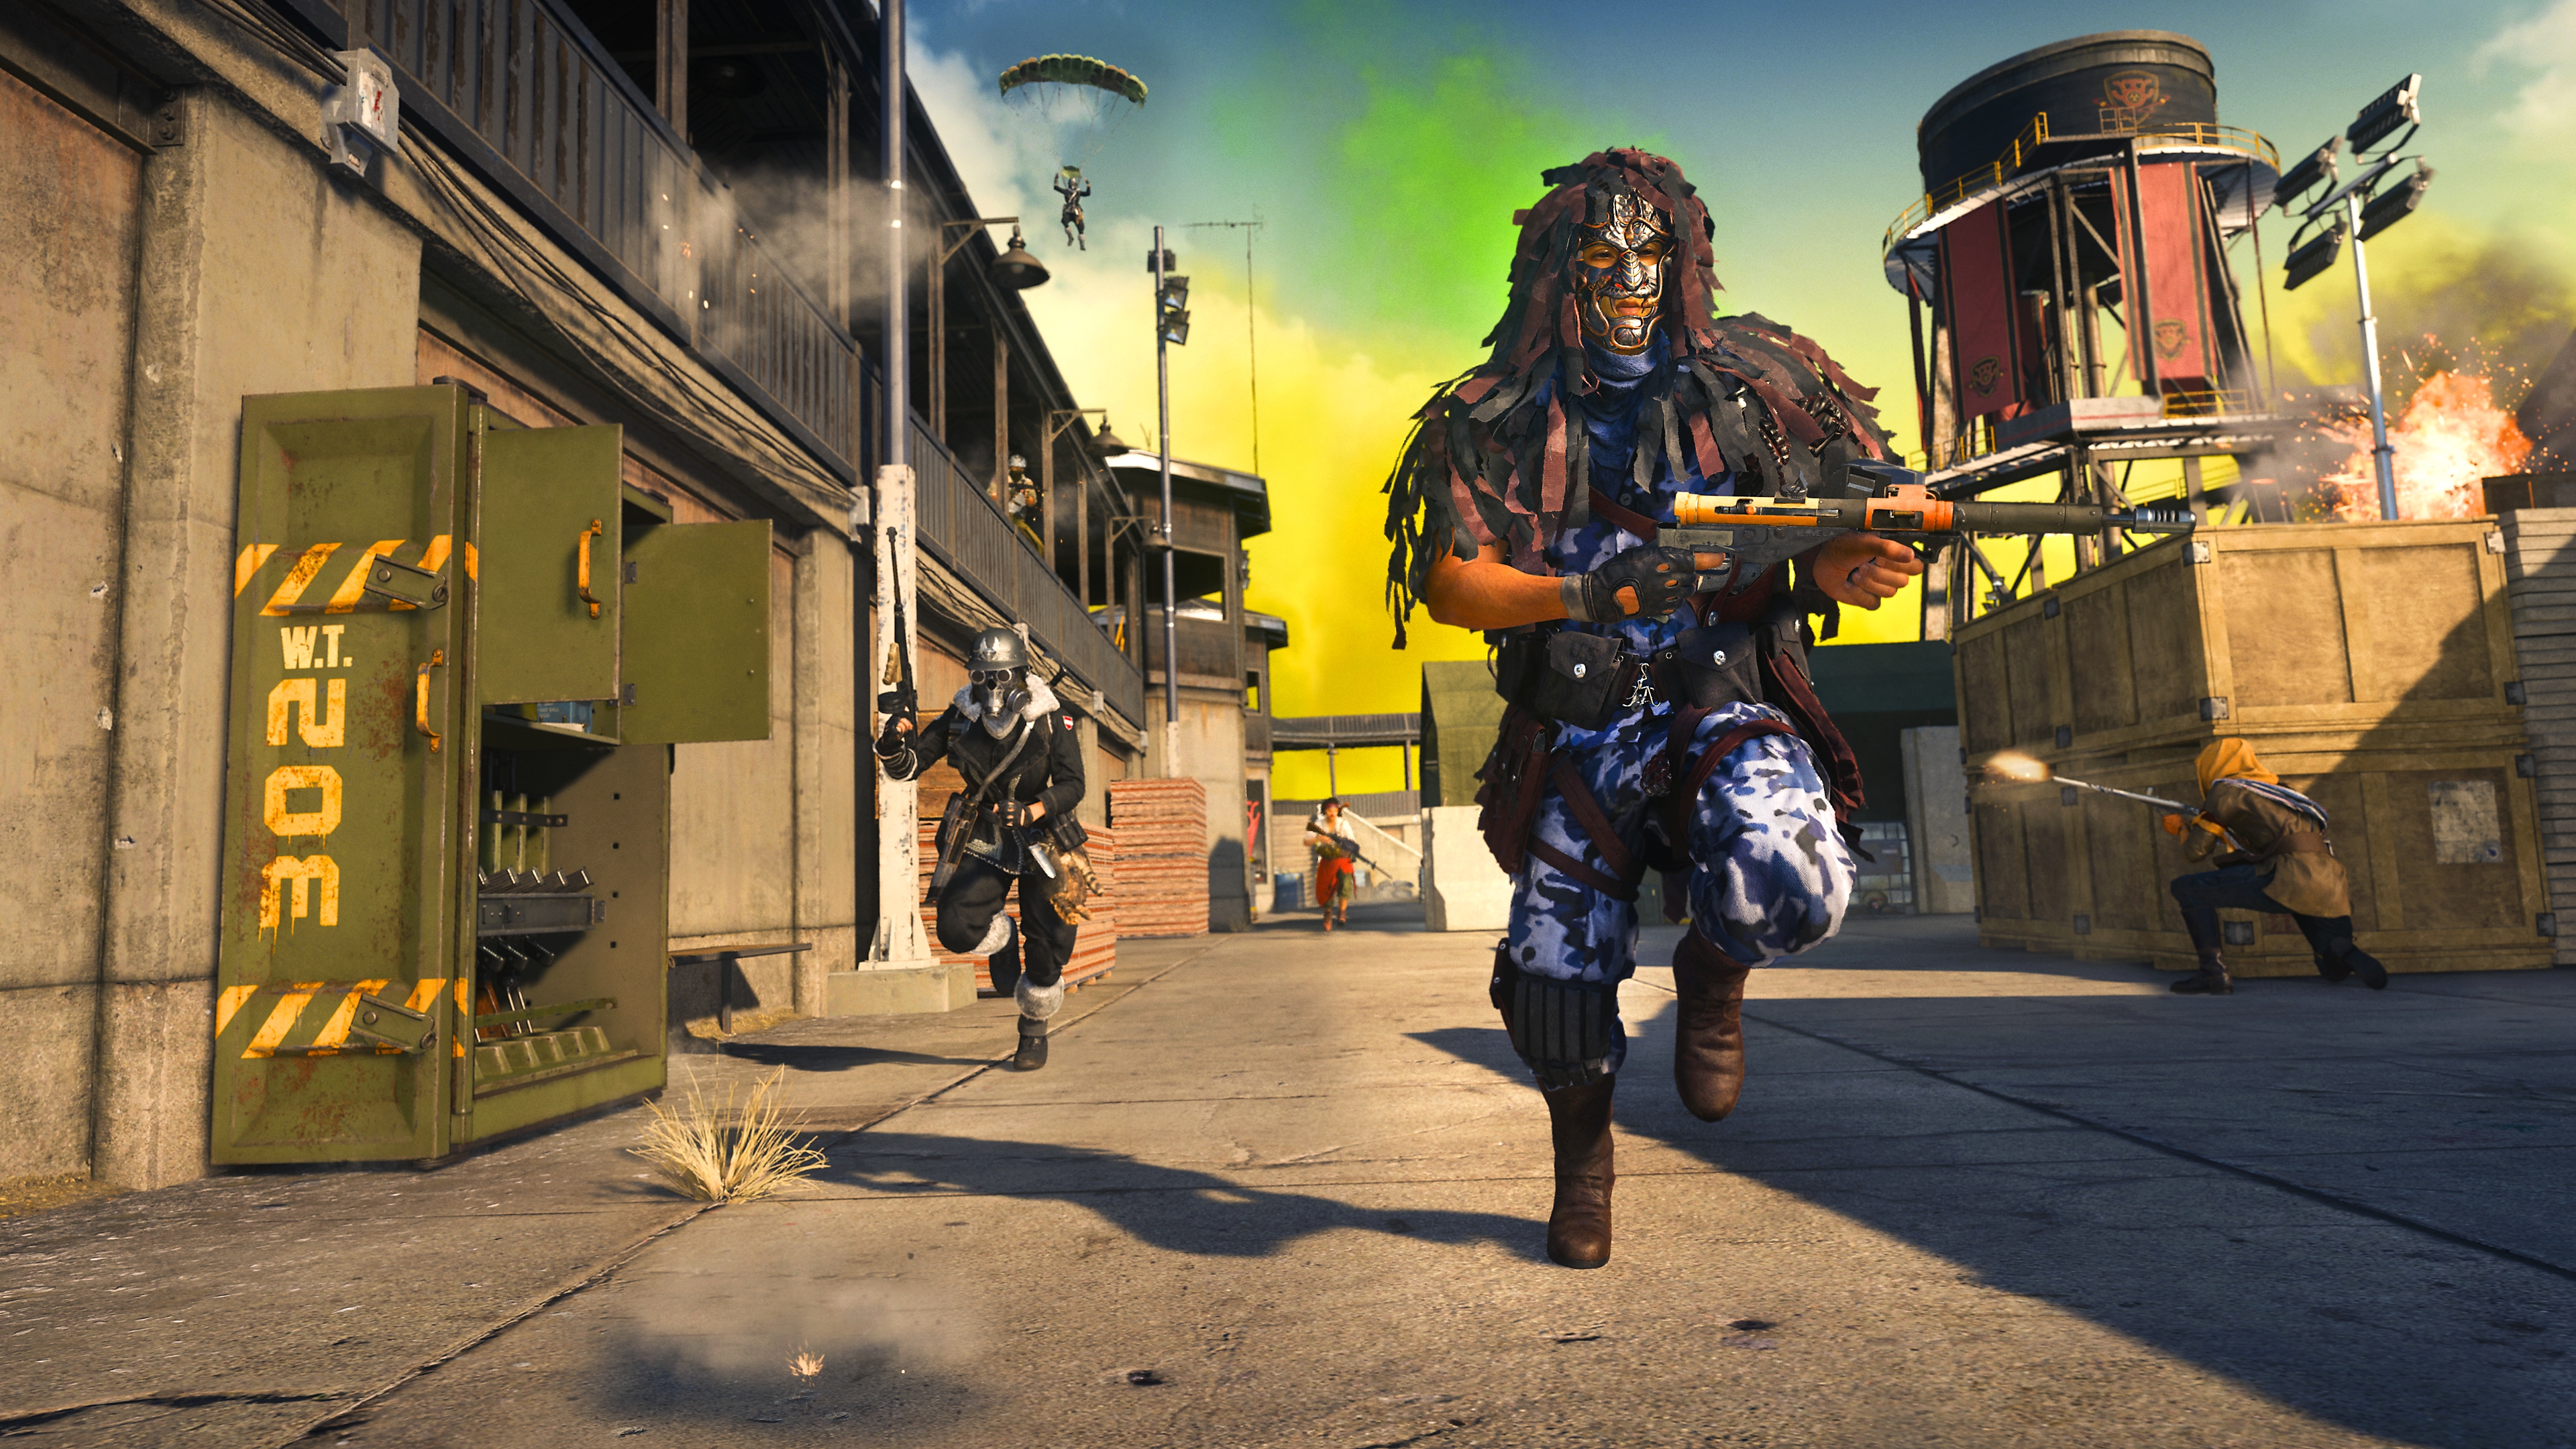 Call of Duty Warzone screenshot showing two players running away from a cloud of yellow gas